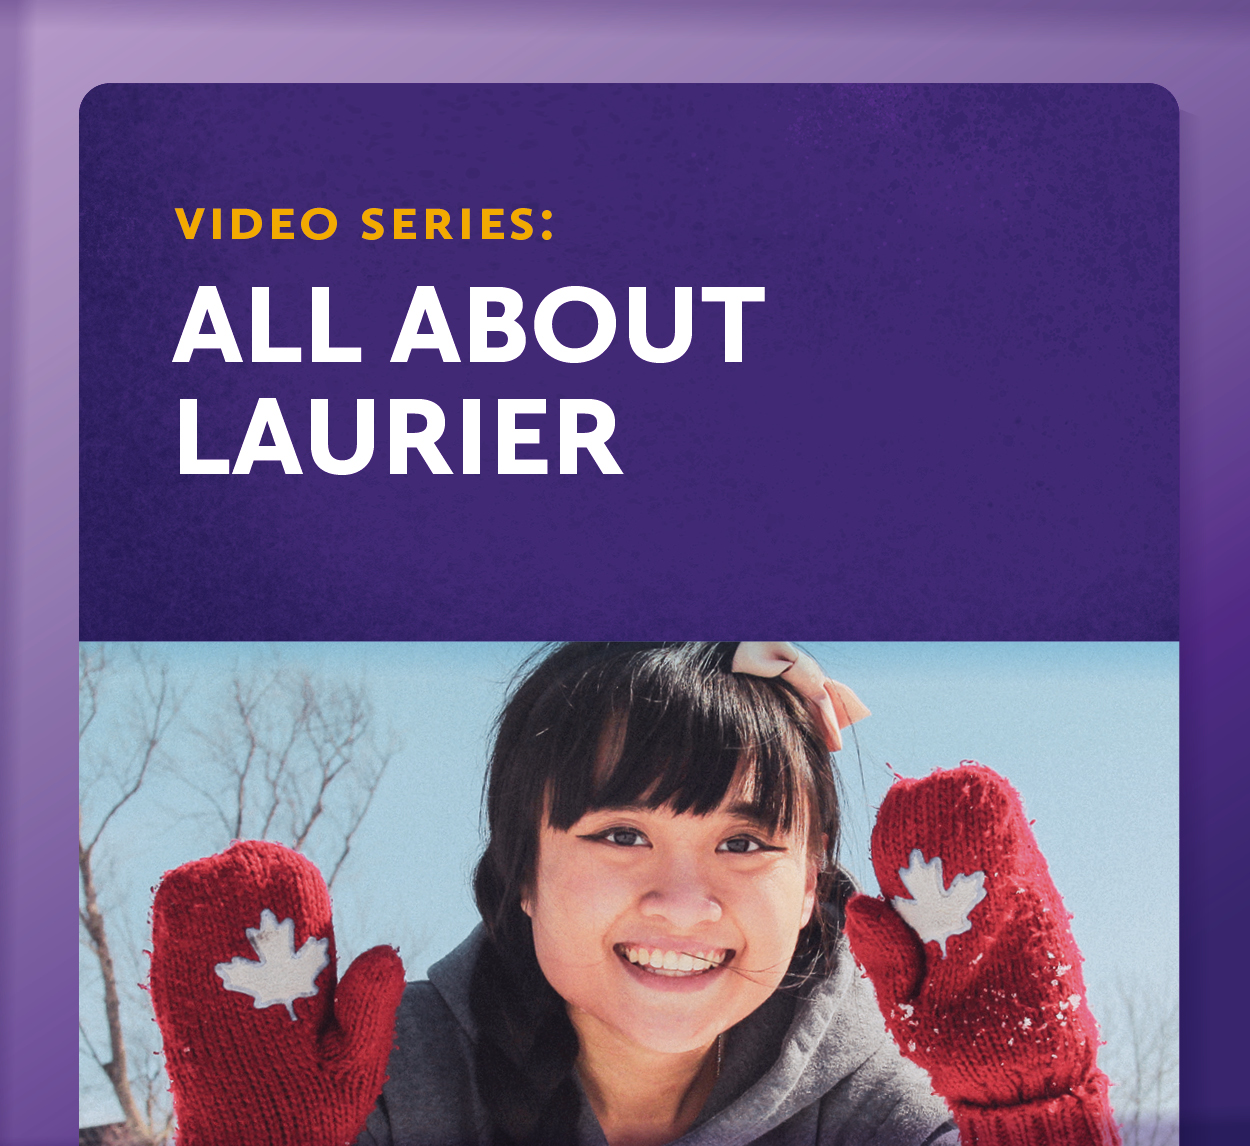 Showcase Image for Video Series: All About Laurier